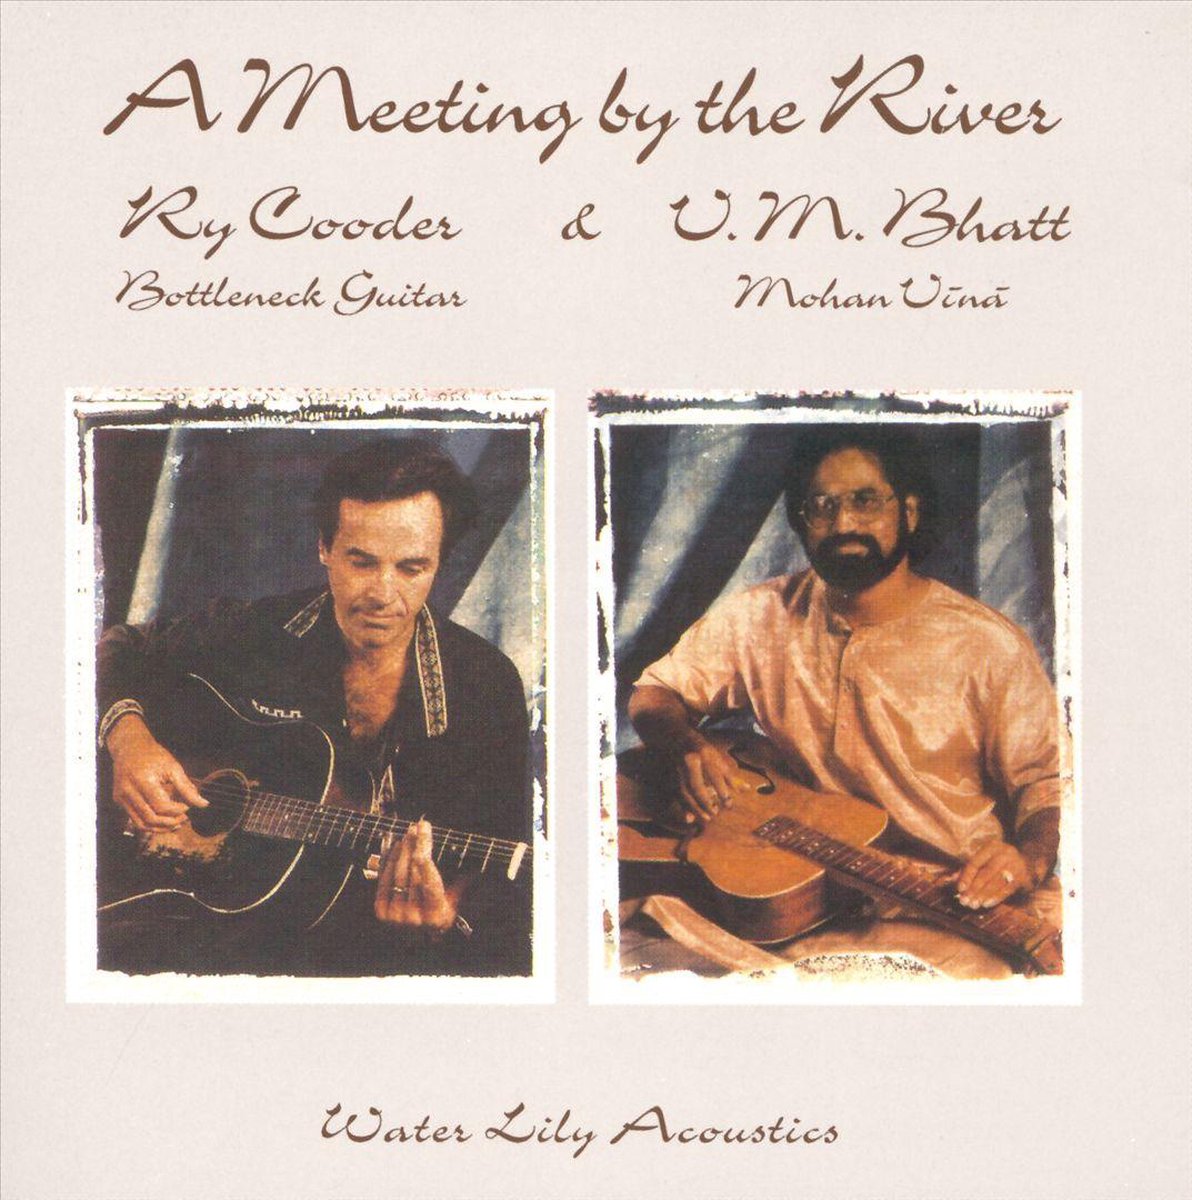 A Meeting By The River - Ry Cooder/U.M. Bhatt